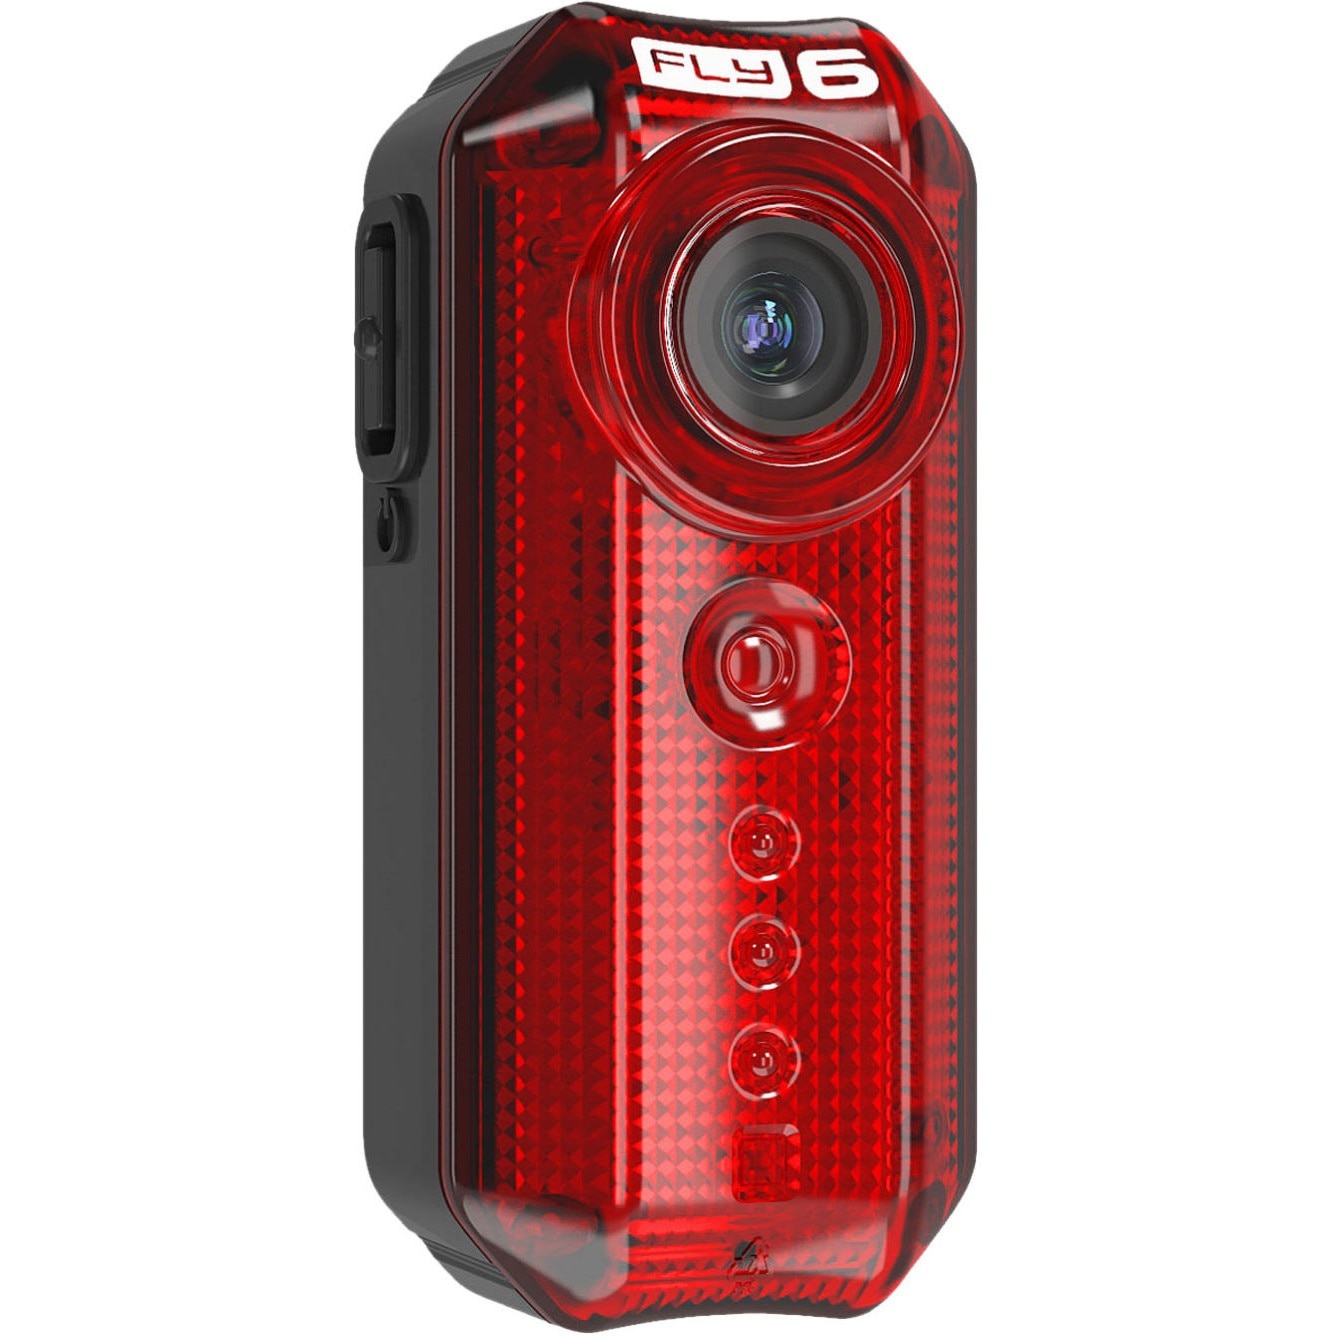 on the other hand, Answer the phone Severe Camera video sport Cycliq FLY6, HD, LED Rosu tip Stop pentru Bicicleta -  eMAG.ro